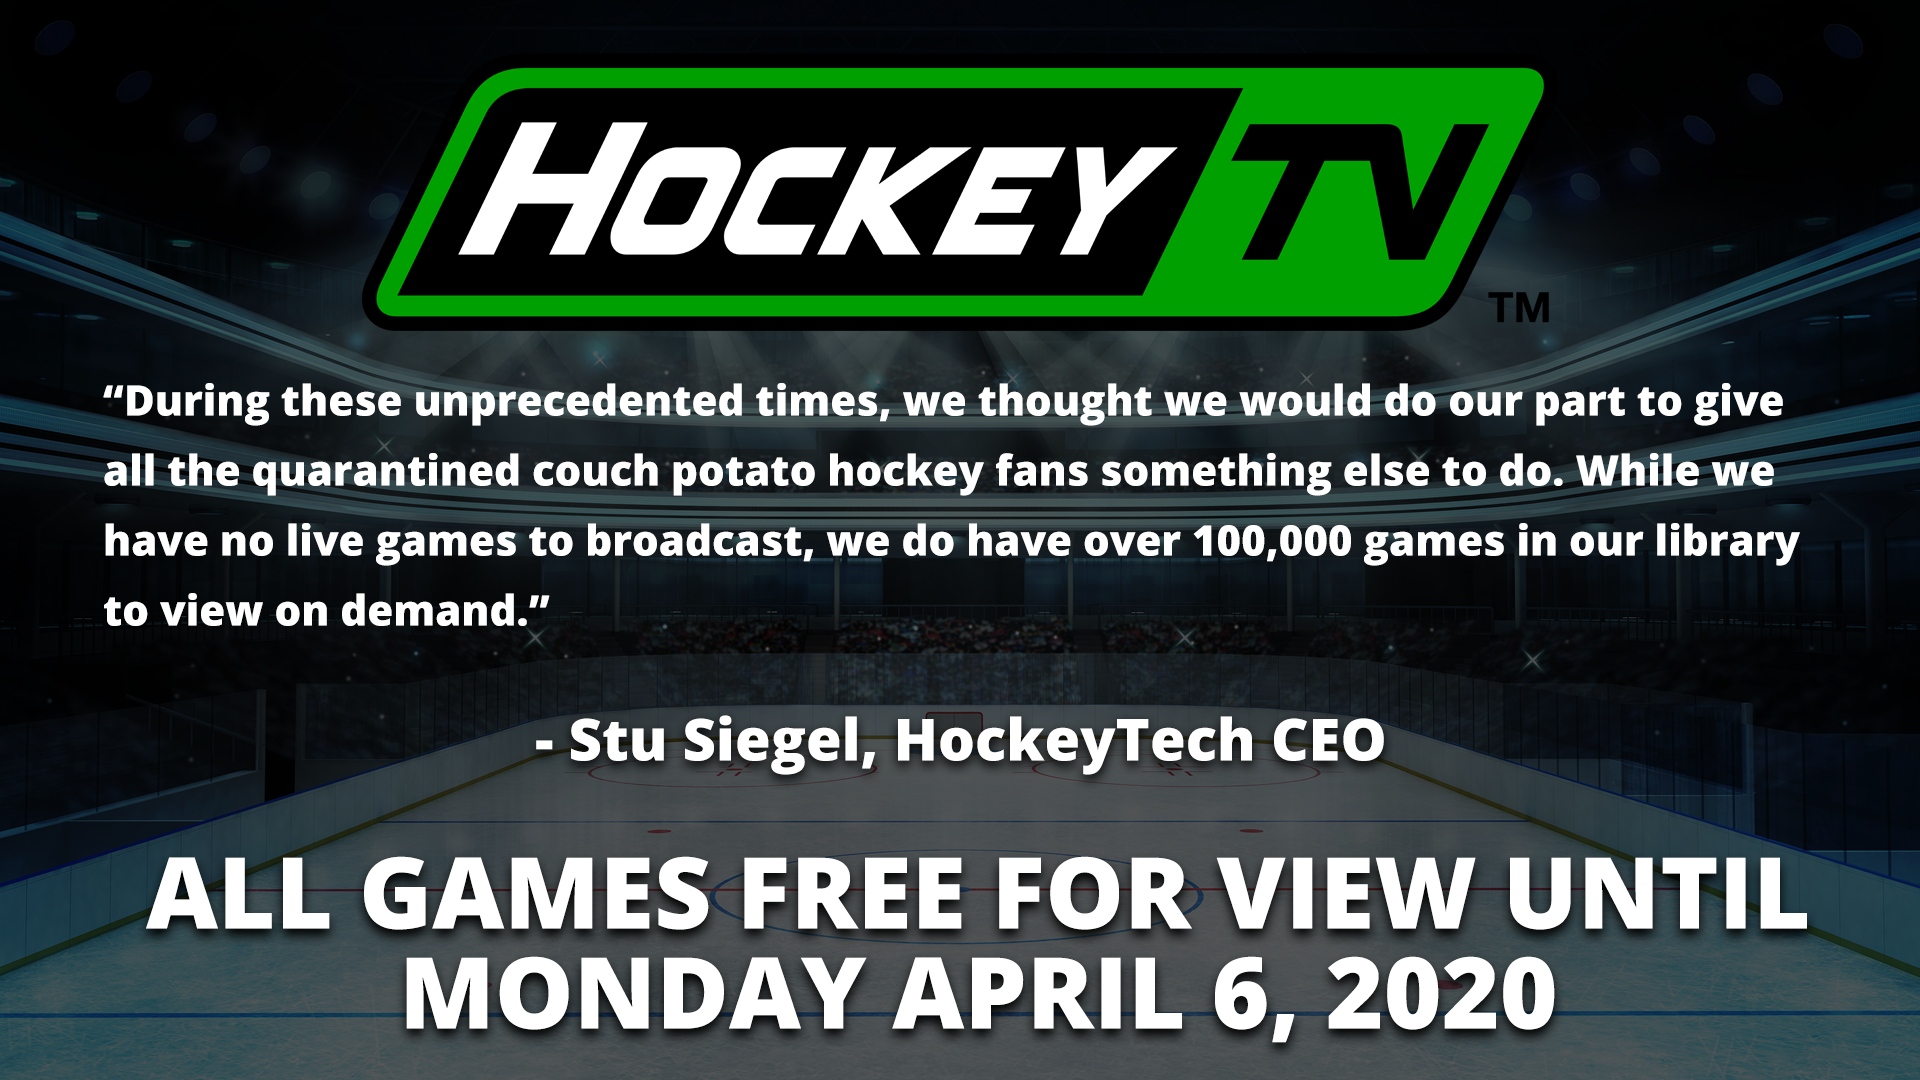 HockeyTV Announces “Free-for-View”